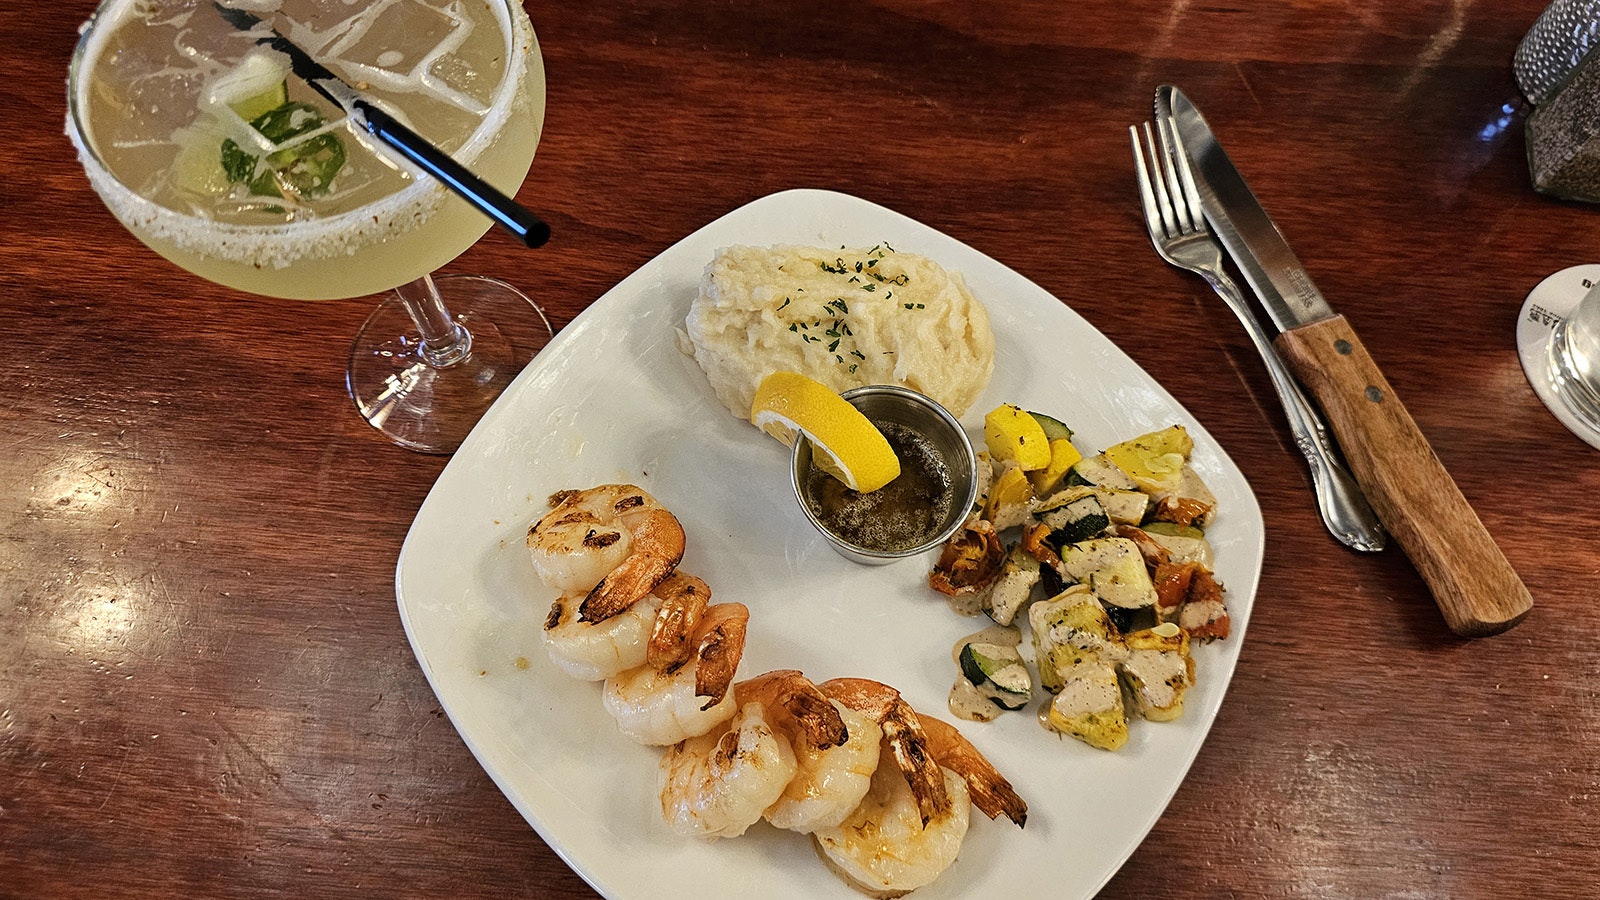 The spicy margarita goes well with the shrimp dinner.